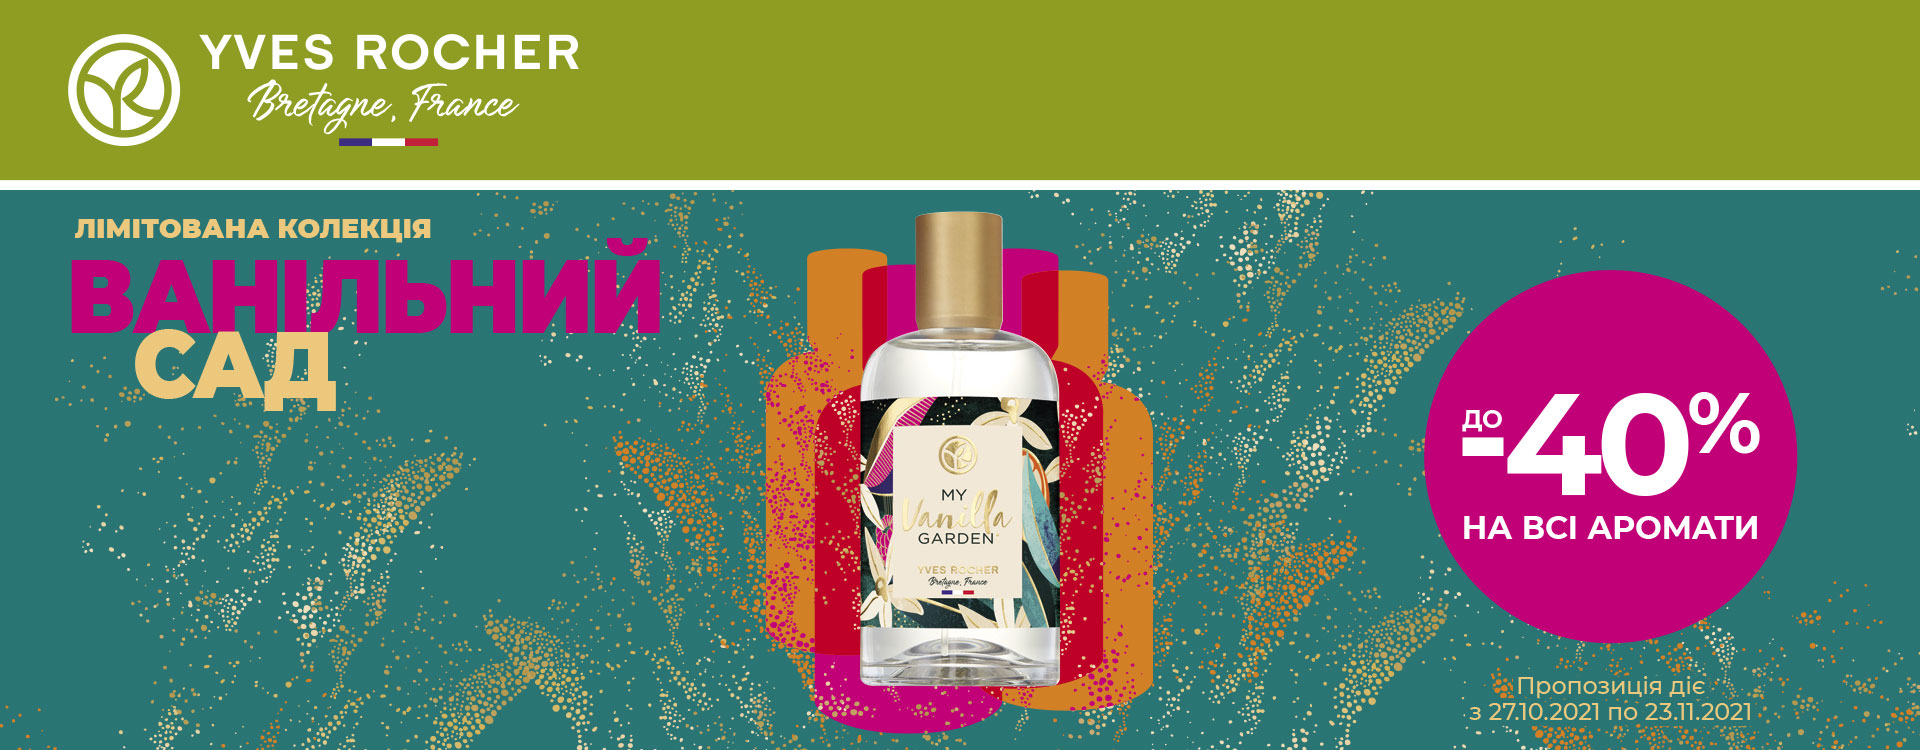 Yves Rocher DISCOUNTS up to -40% on aromas